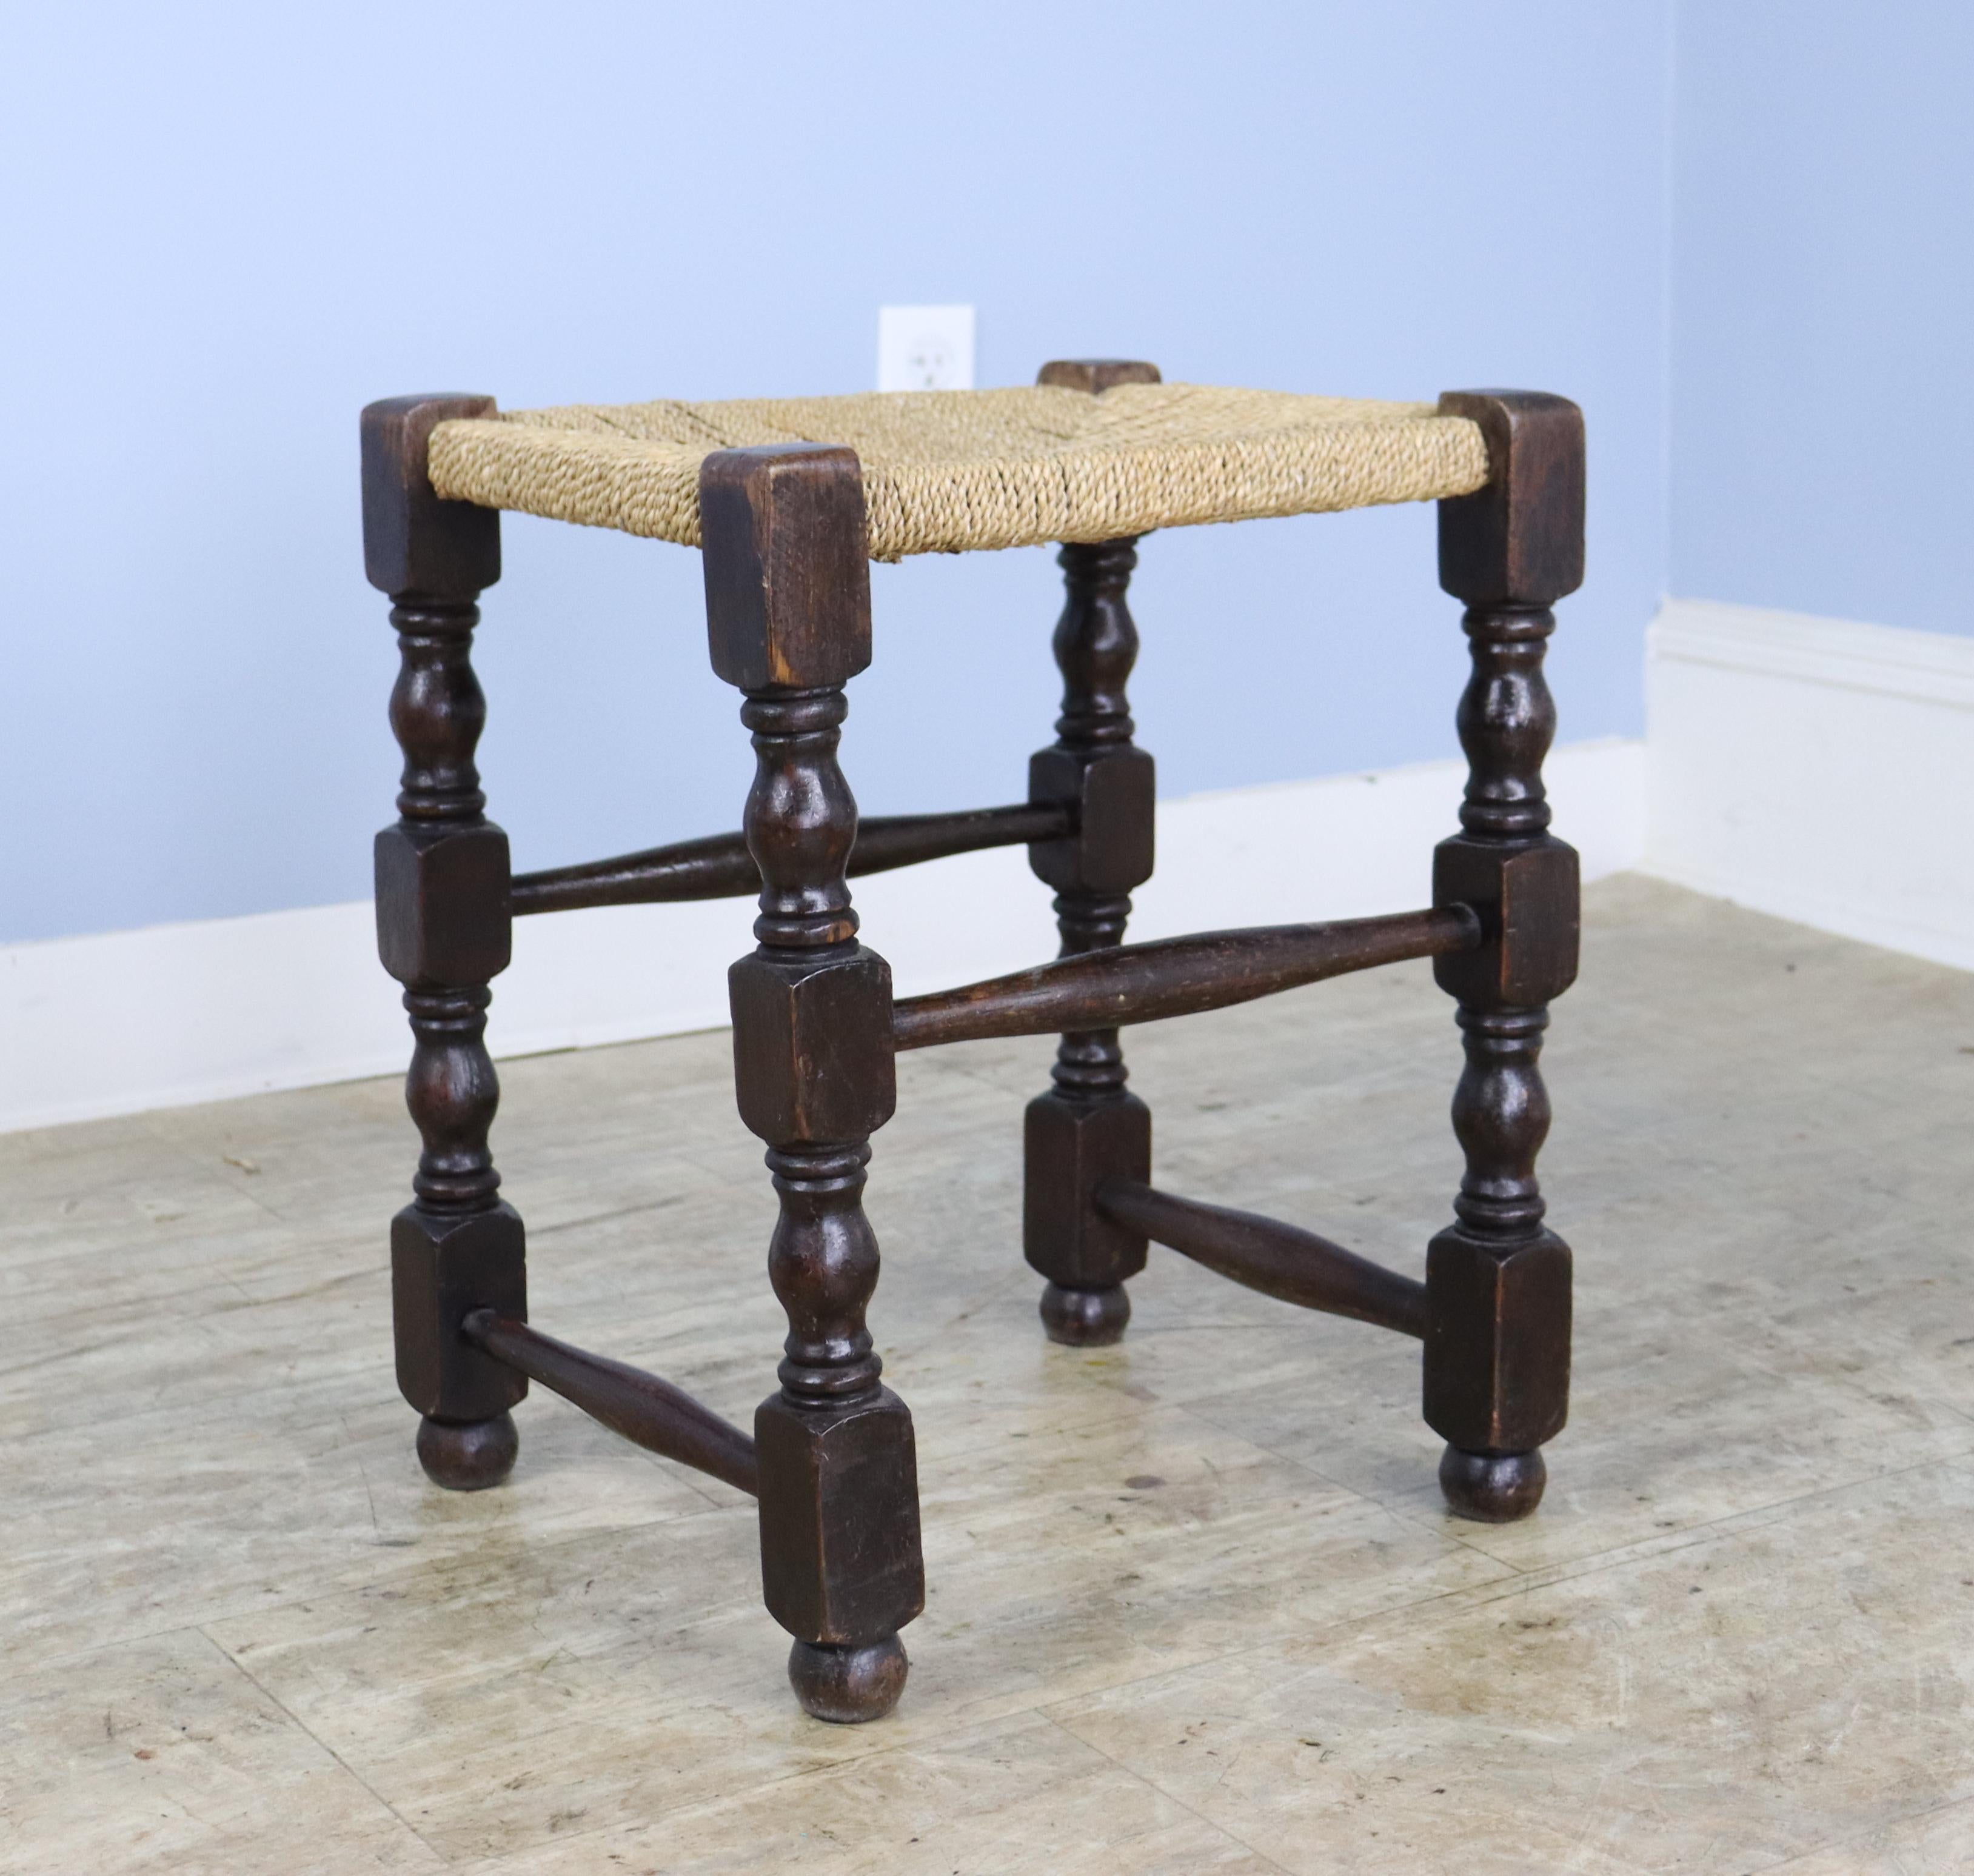 A dark oak version of the traditional English string stool complete with elegant patterned woven seat. Small enough to tuck away for extra seating, but so pretty it should be on display! Sturdy enough to use as a chair, pulled up to a desk or